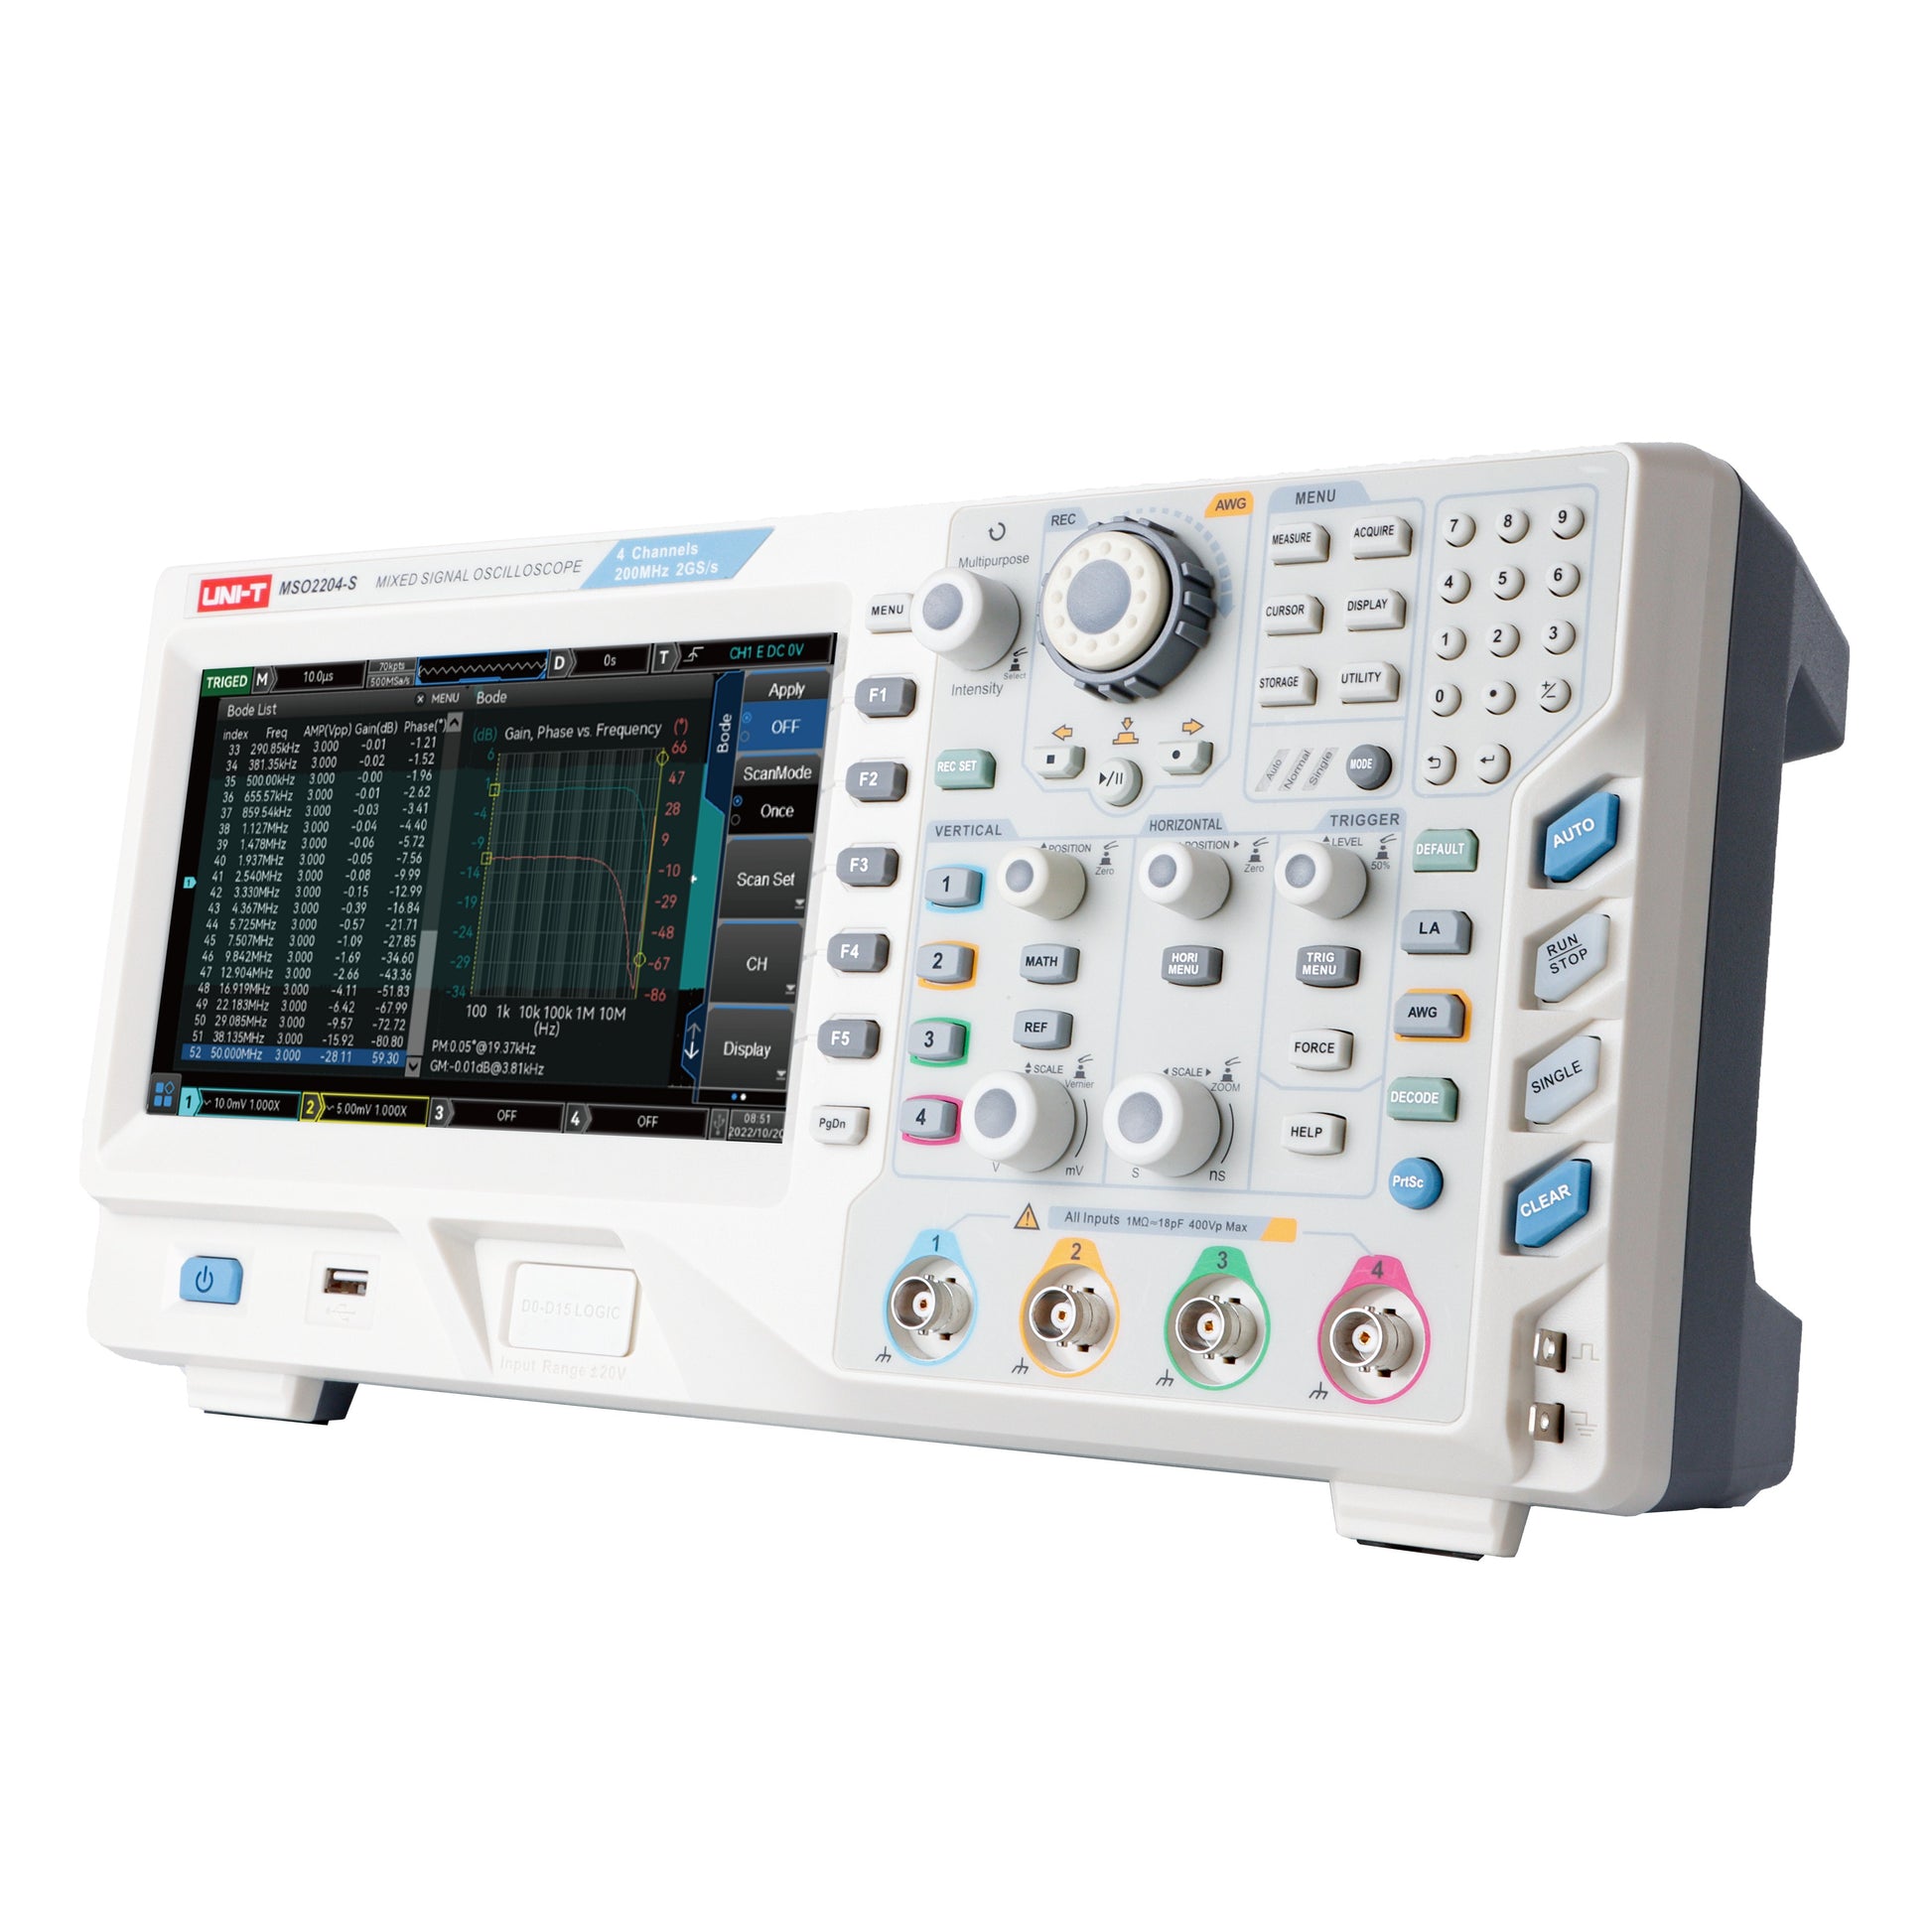 Uni-T MSO2204-S 200MHz 4+16Ch MSO with Signal Generator Isometric Image